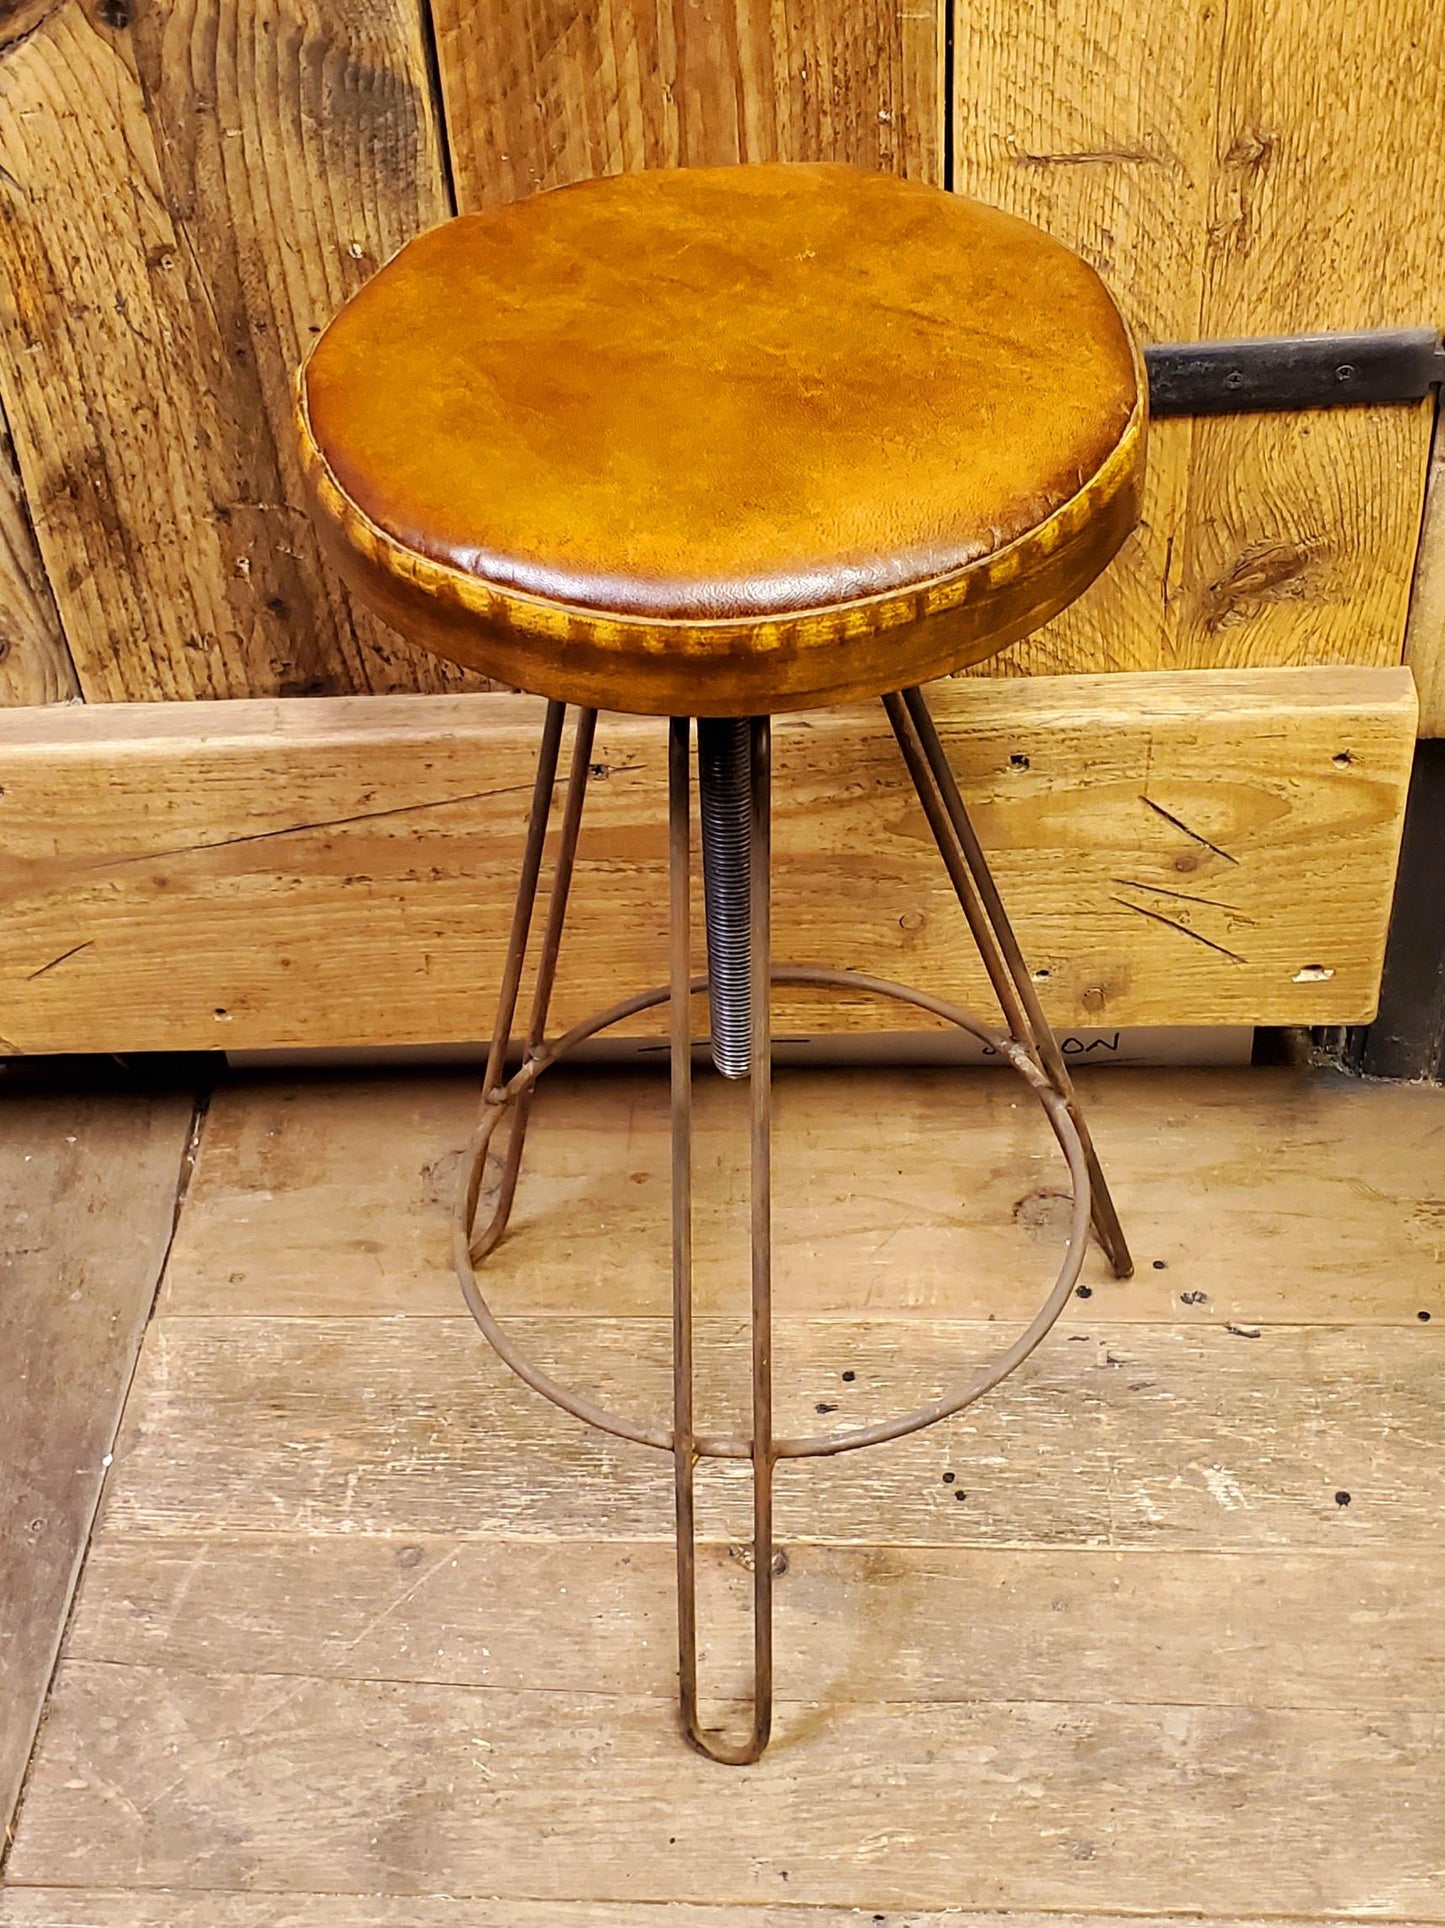 The Maxwell - Hairpin Leg Stool - Adjustable Height Swivel Stool with Leather Seat Top